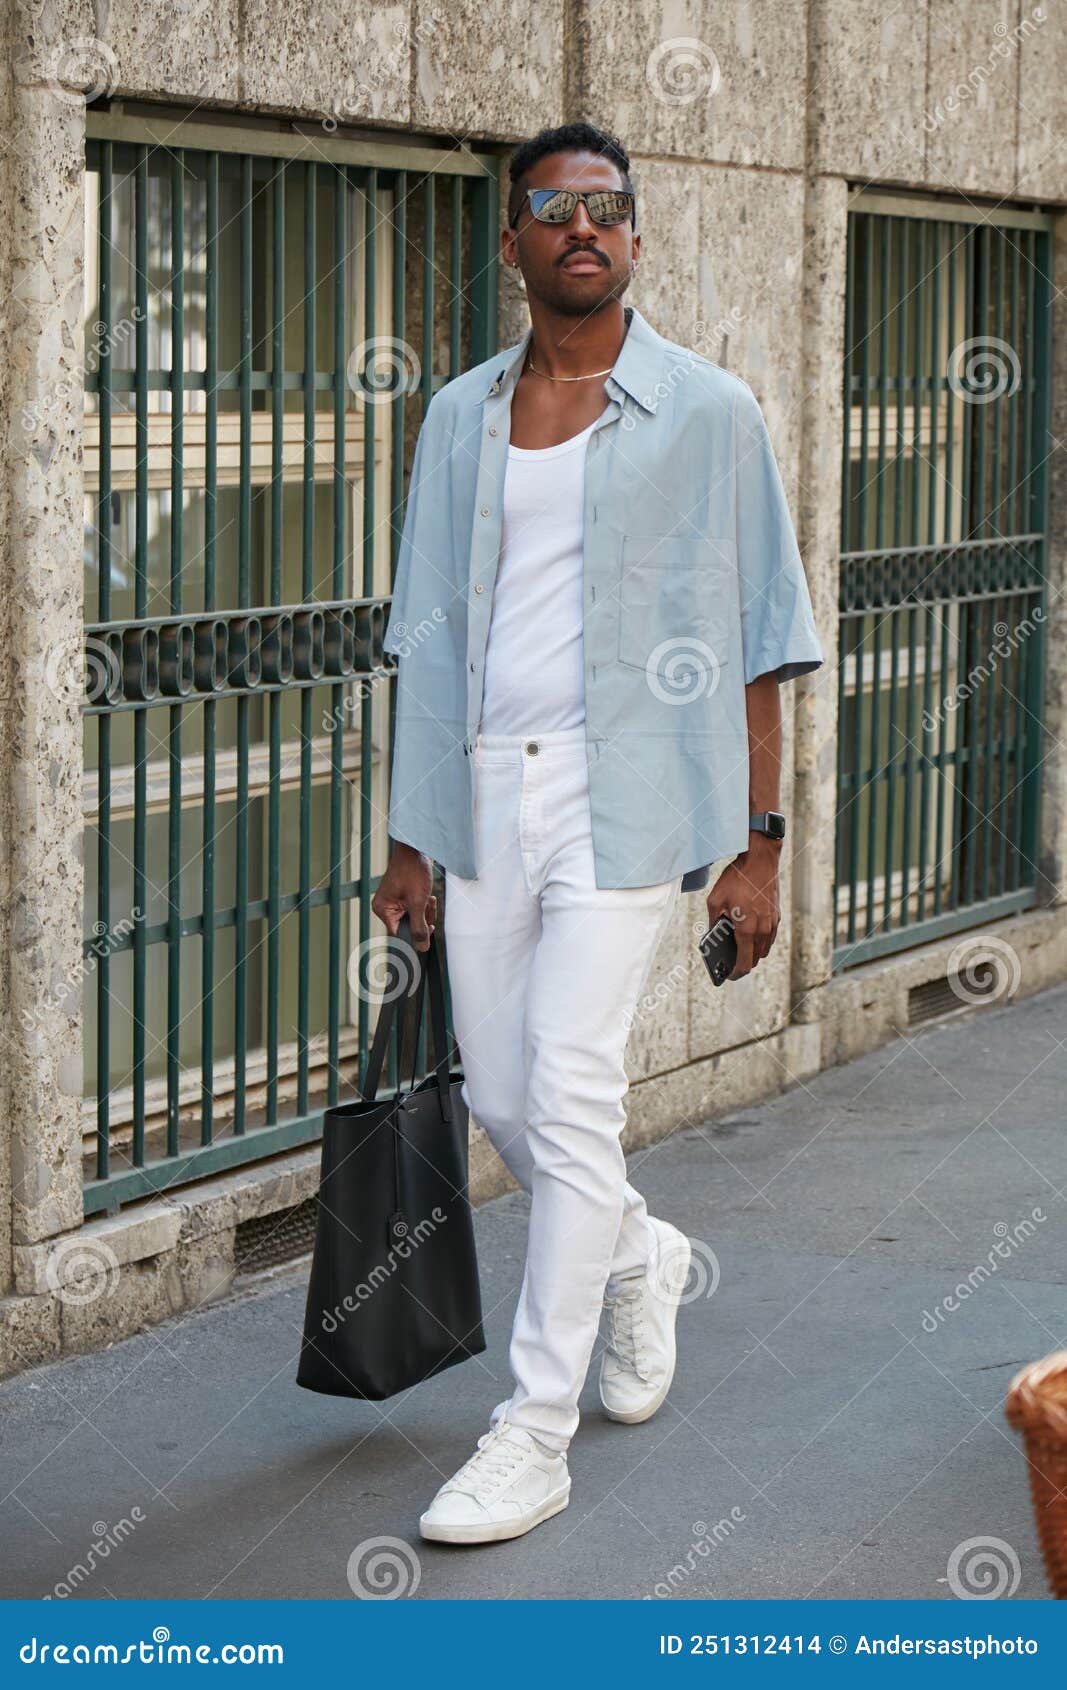 Man with Pale Blue Shirt, White Trousers and Sneakers before